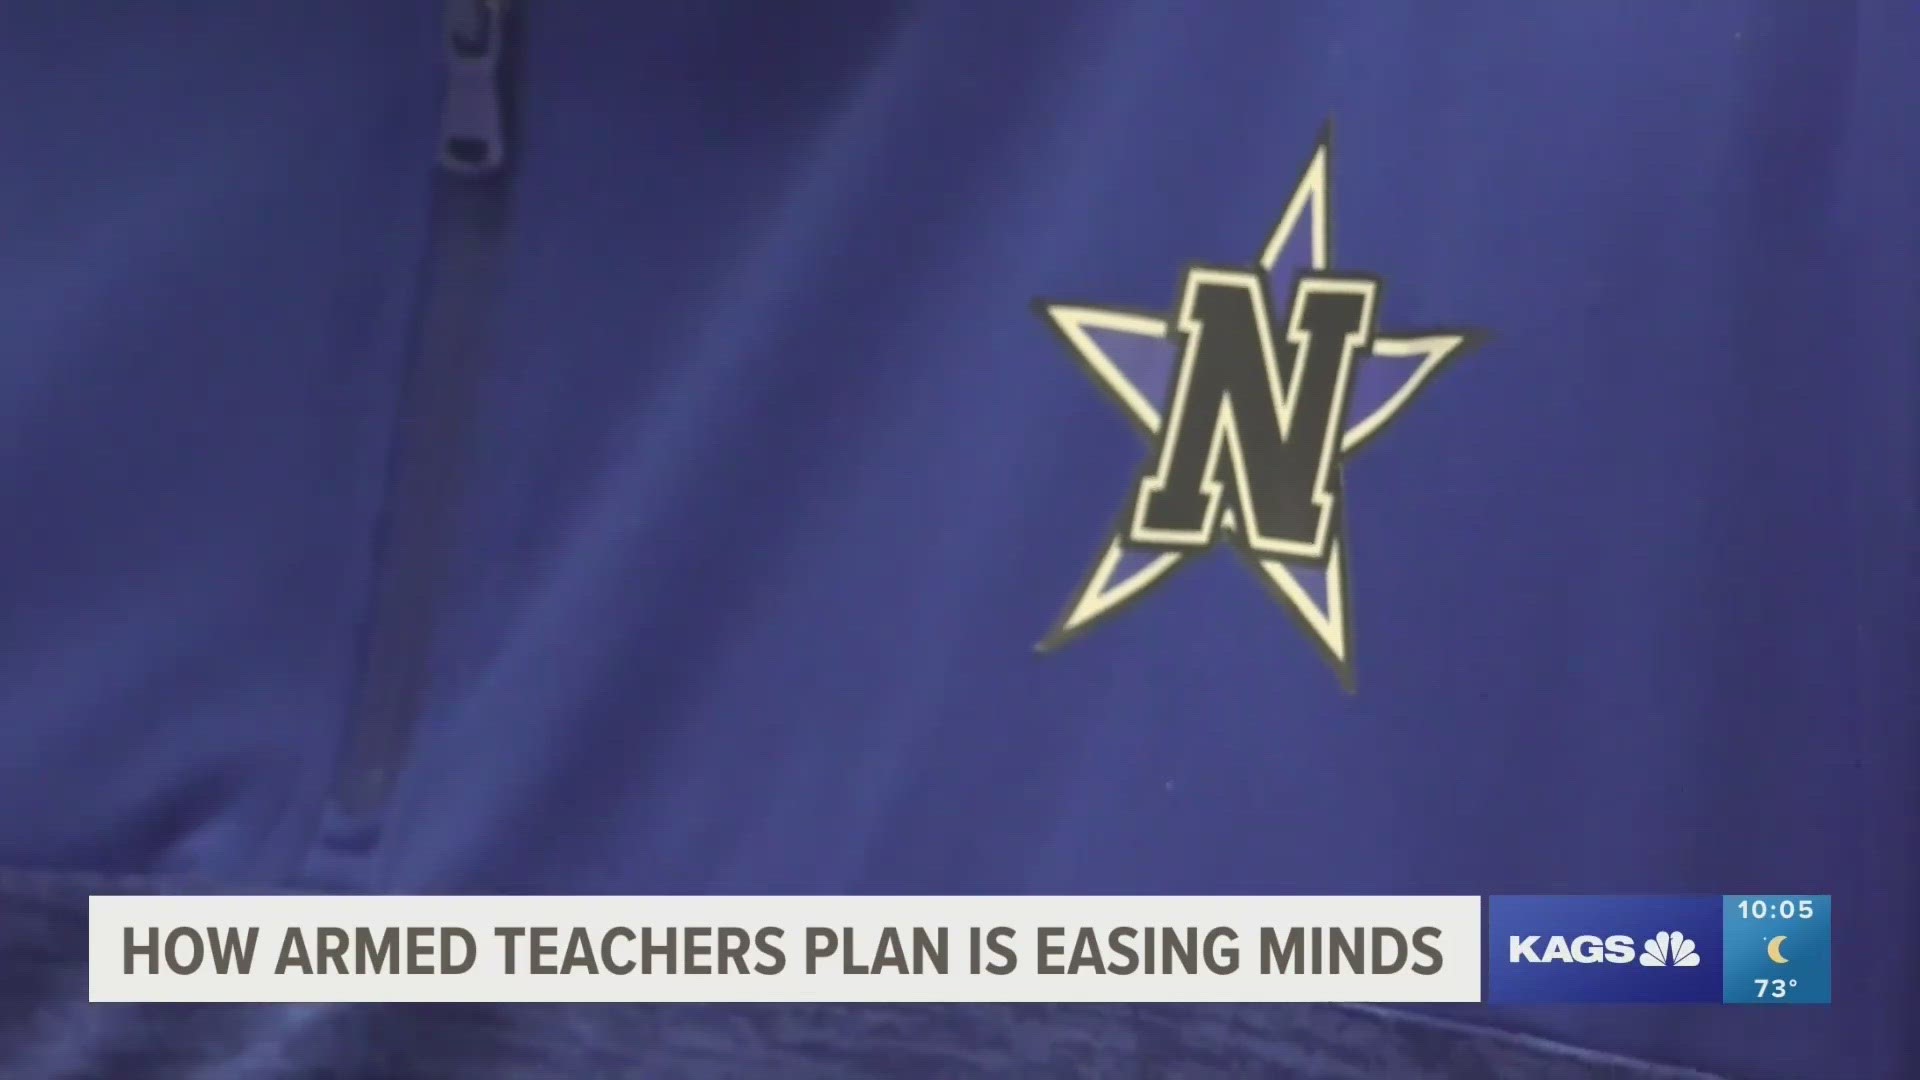 Despite a survey stating 76% of teachers not wanting to be armed in the wake of Uvalde, Other school districts have commended Navasota ISD for their Guardian Plan.